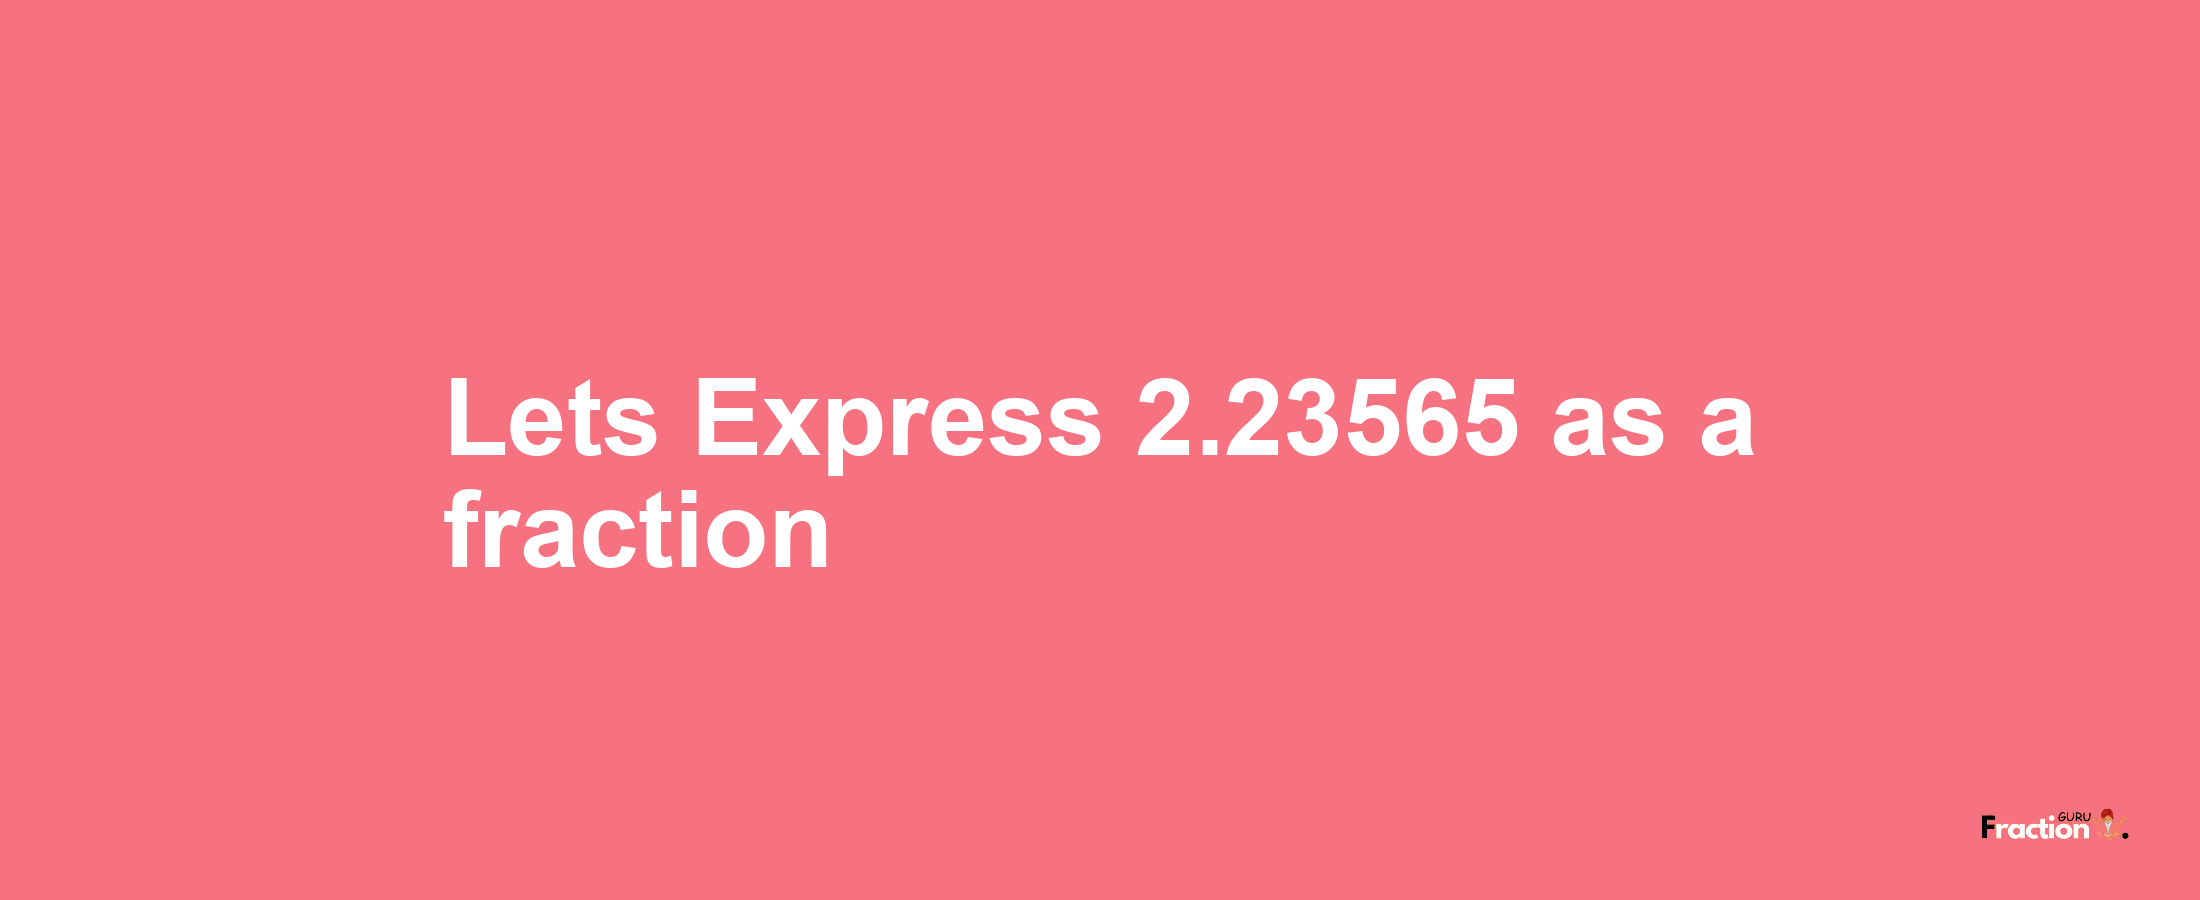 Lets Express 2.23565 as afraction